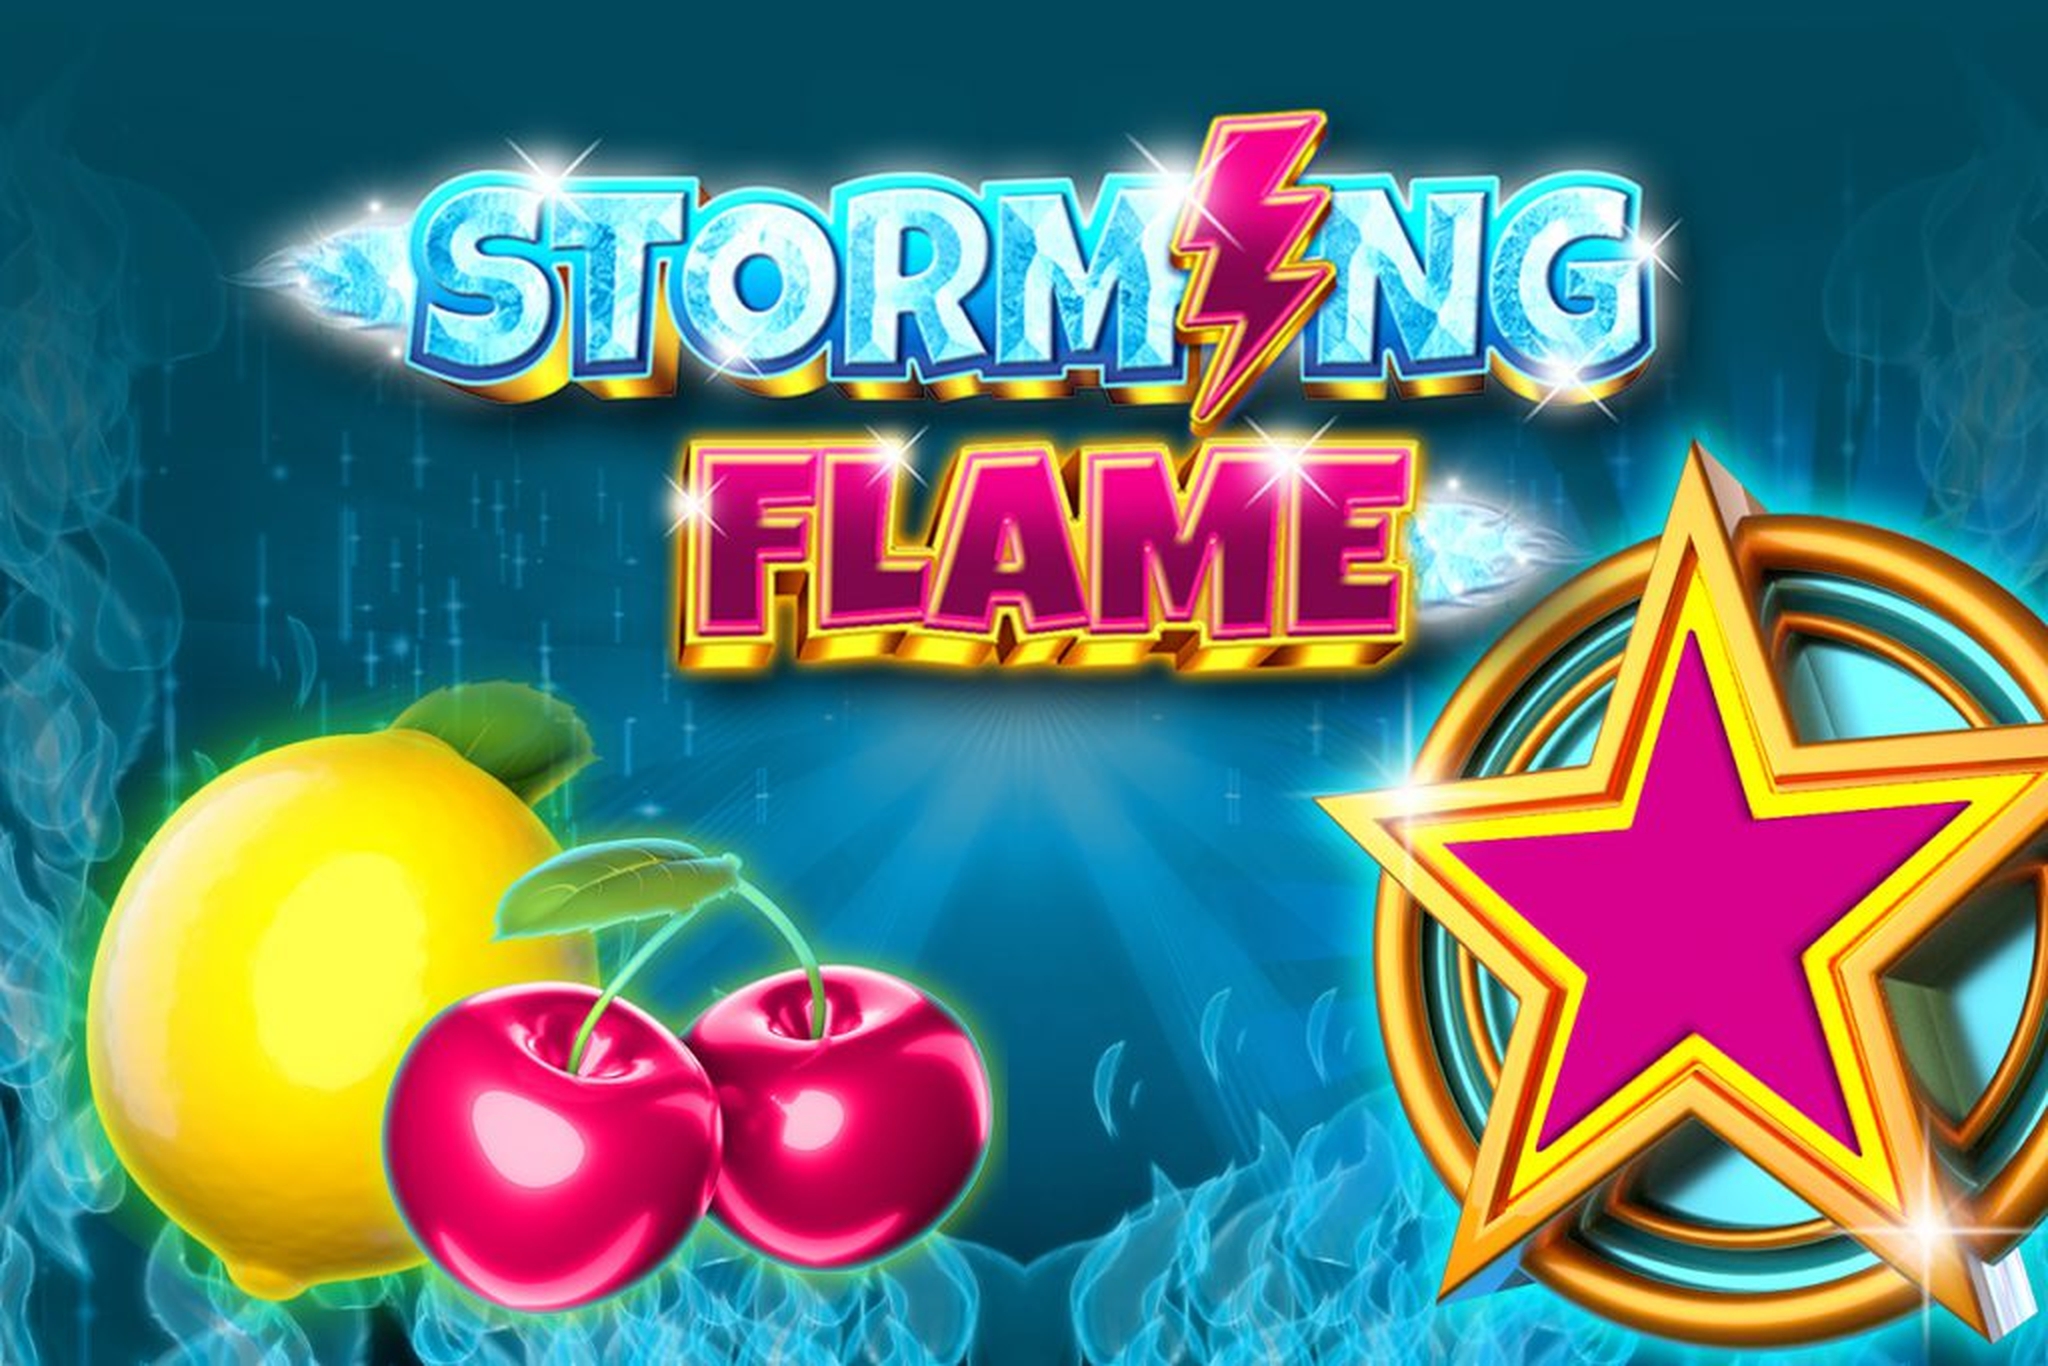 Storming Flame demo